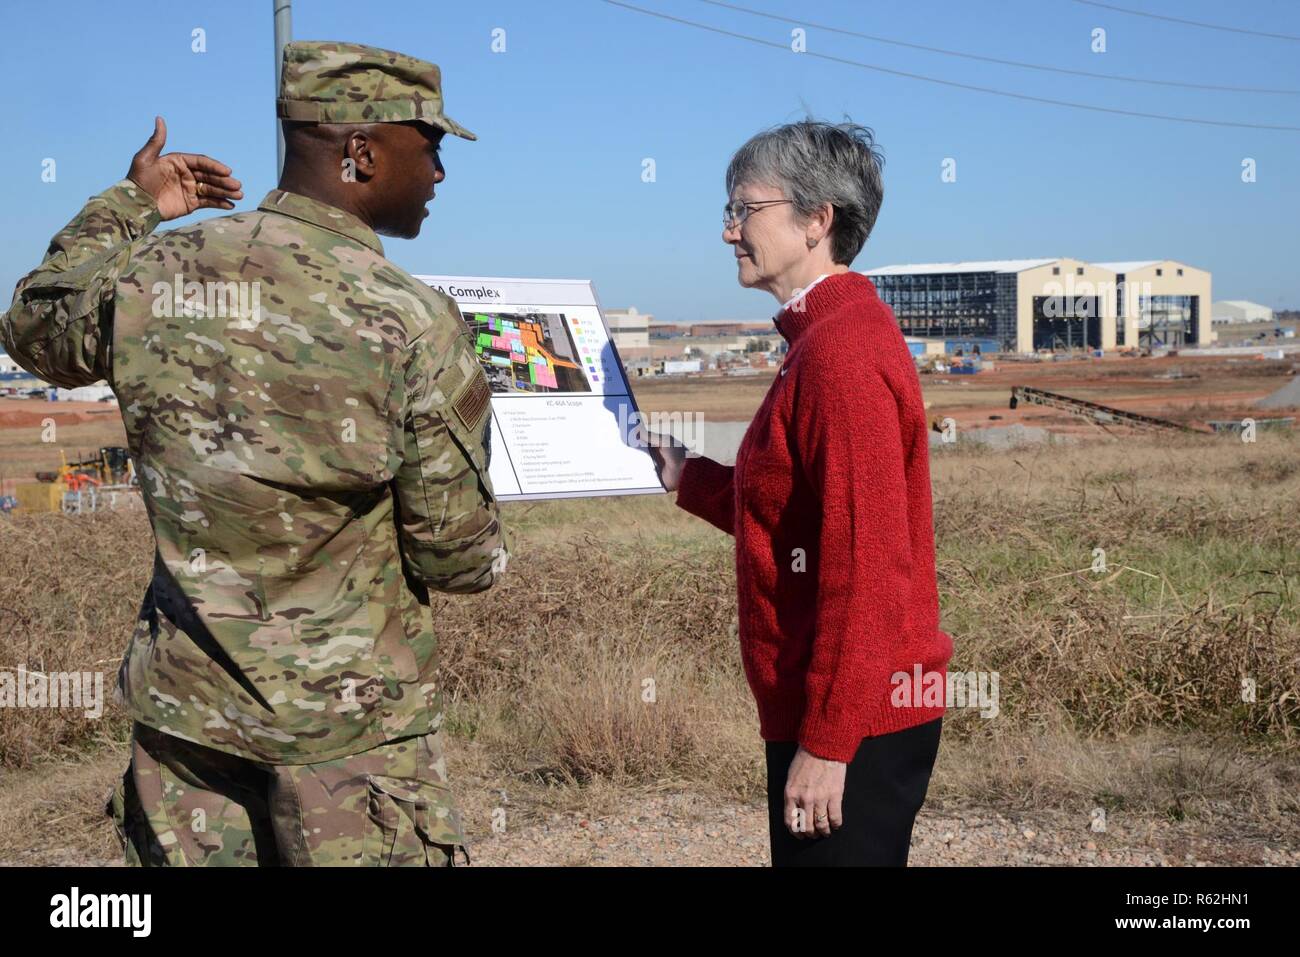 Col. Kenyon Bell, 72nd Air Base Wing commander, gives Secretary of the Air Force Heather Wilson, an overview of the KC-46A program and its maintenance campus under construction in the background during her visit to Tinker Air Force Base Nov. 16. This is Wilson’s first visit to Tinker since becoming secretary. Stock Photo